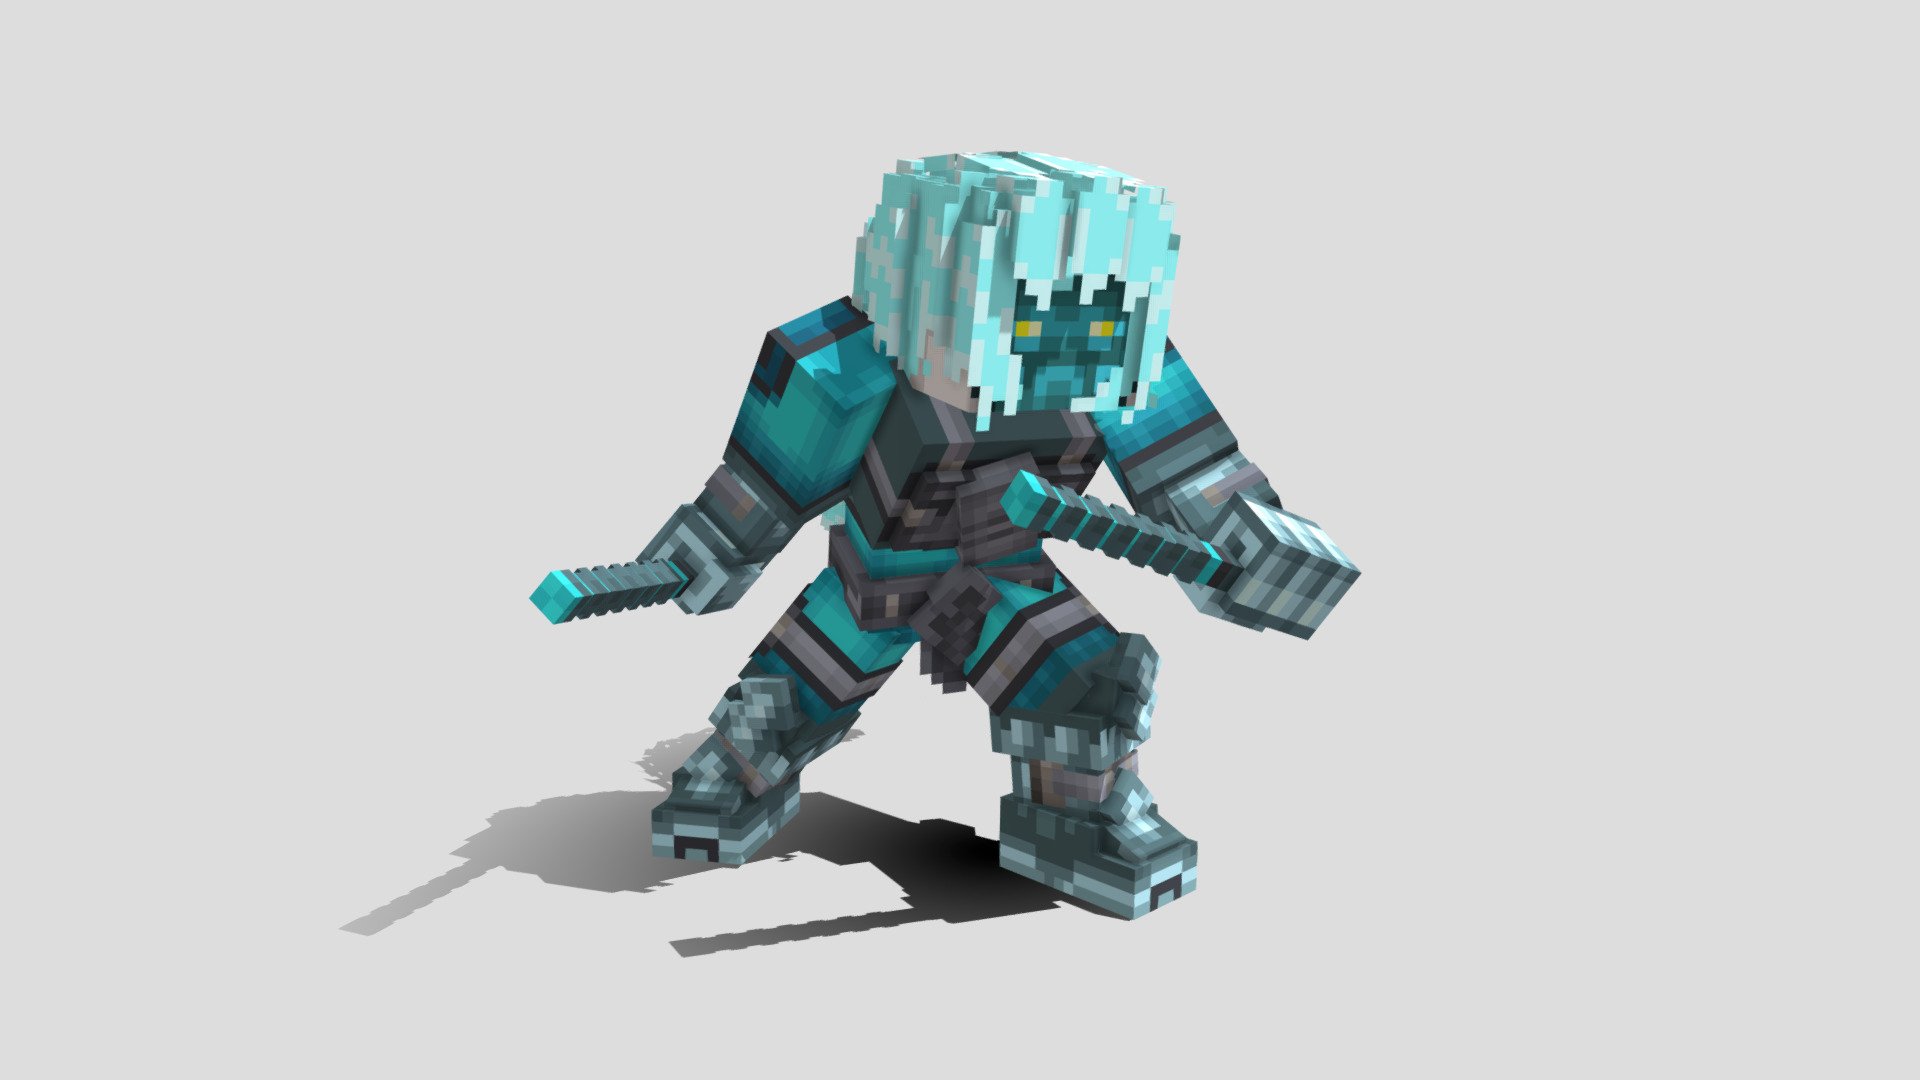 Bedrock Minecraft Model - A Sci Fi / Cyberpunk Neko Assassin with Electro-Sticks ready for action. The Neko character has an animated tail and an ice blue design.
This is an in depth and fully animated rig of a Custom Player Character Model / Custom Mob / Boss made exclusively for Minecraft Bedrock Edition

Blockbench model can be exported to work with other game engines.

The purchased model, animations and/or rigg can be applied as part-content to your Official Bedrock Minecraft maps and projects.



See more of my work via https://www.youtube.com/artsbykev

Reach out via https://www.twitter.com/artsbykev



For business inquiries reach out to business.artsbykev@gmail.com - Cyberpunk Assassin - Animated Minecraft Model - Buy Royalty Free 3D model by ArtsByKev Studio (@ArtsByKev) 3d model